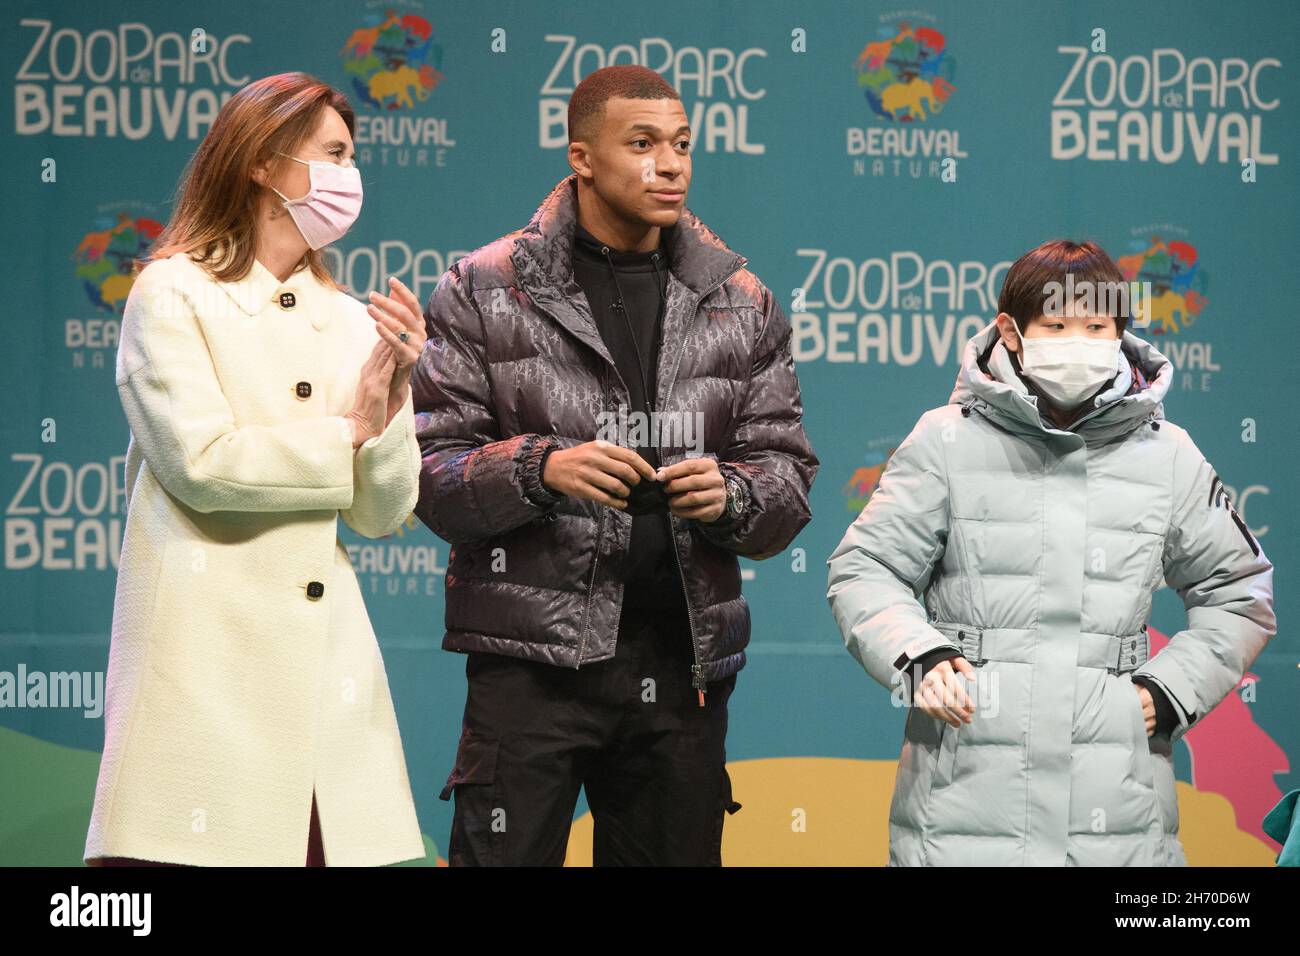 French footballer and PSG star Kylian Mbappe and China's gold medalist in  10-meter synchronised diving at the Tokyo Olympics, Zhang Jiaqi attending a  ceremony at Beauval zoo, center France on November 18,